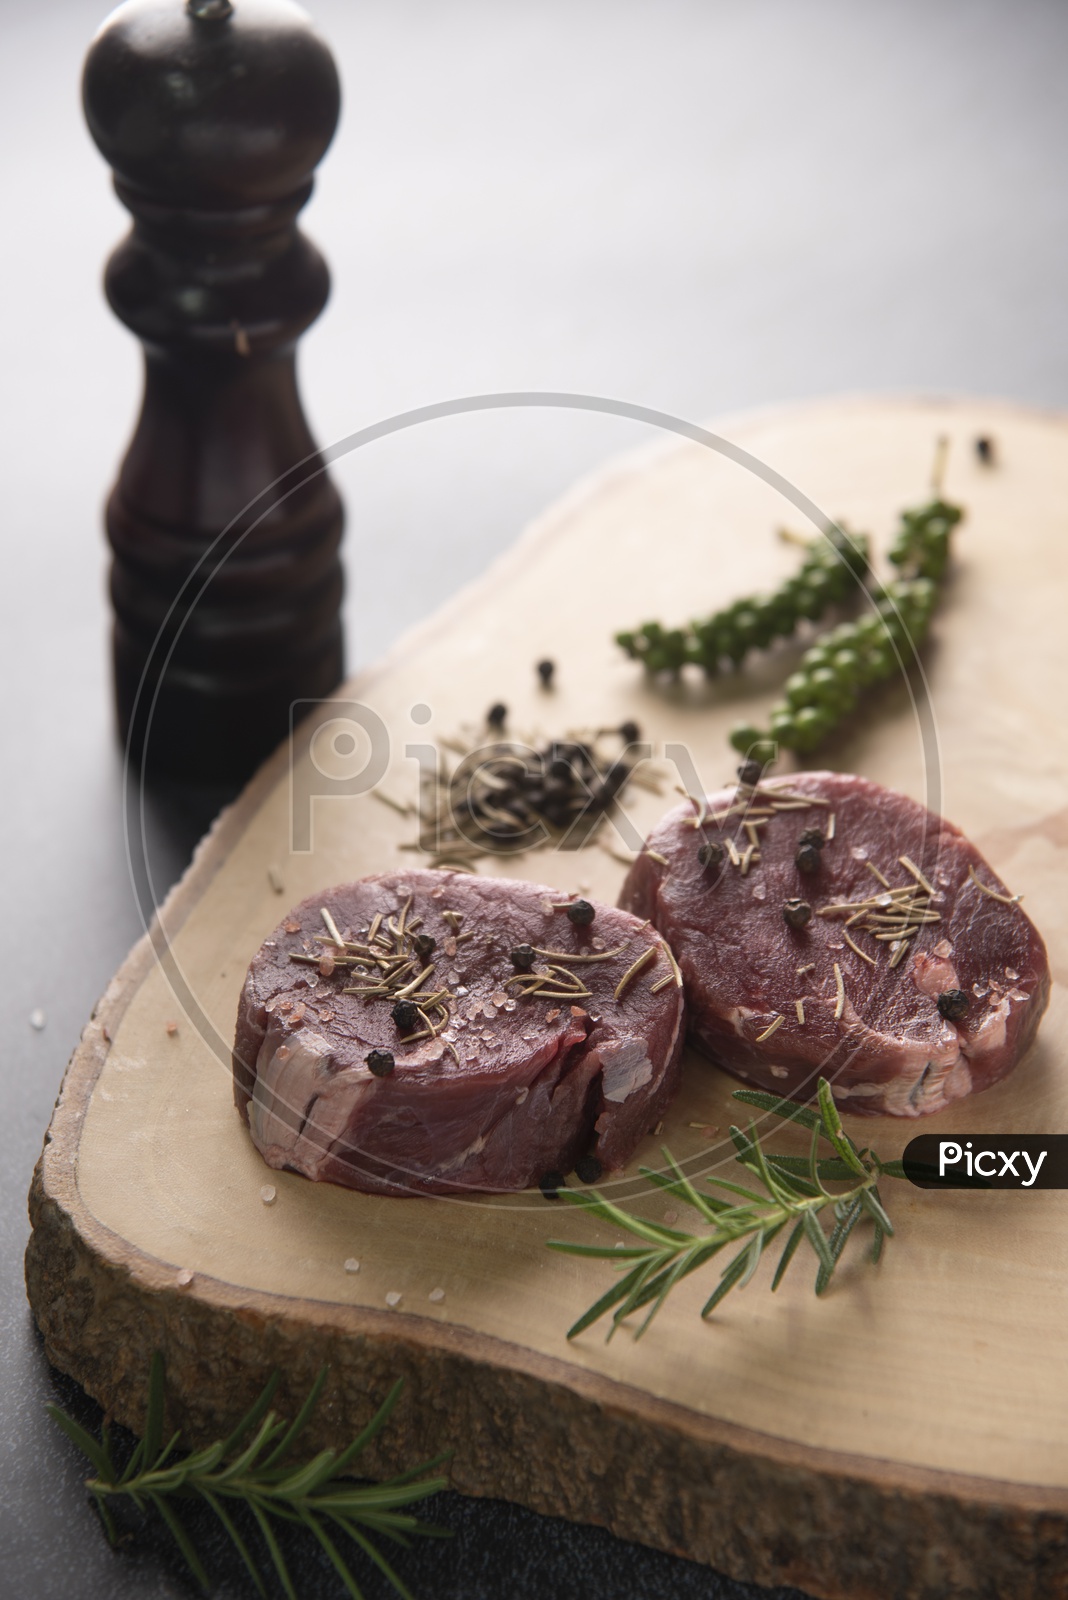 Spices Topped On Raw Beef Steaks On wooden Cutting Board